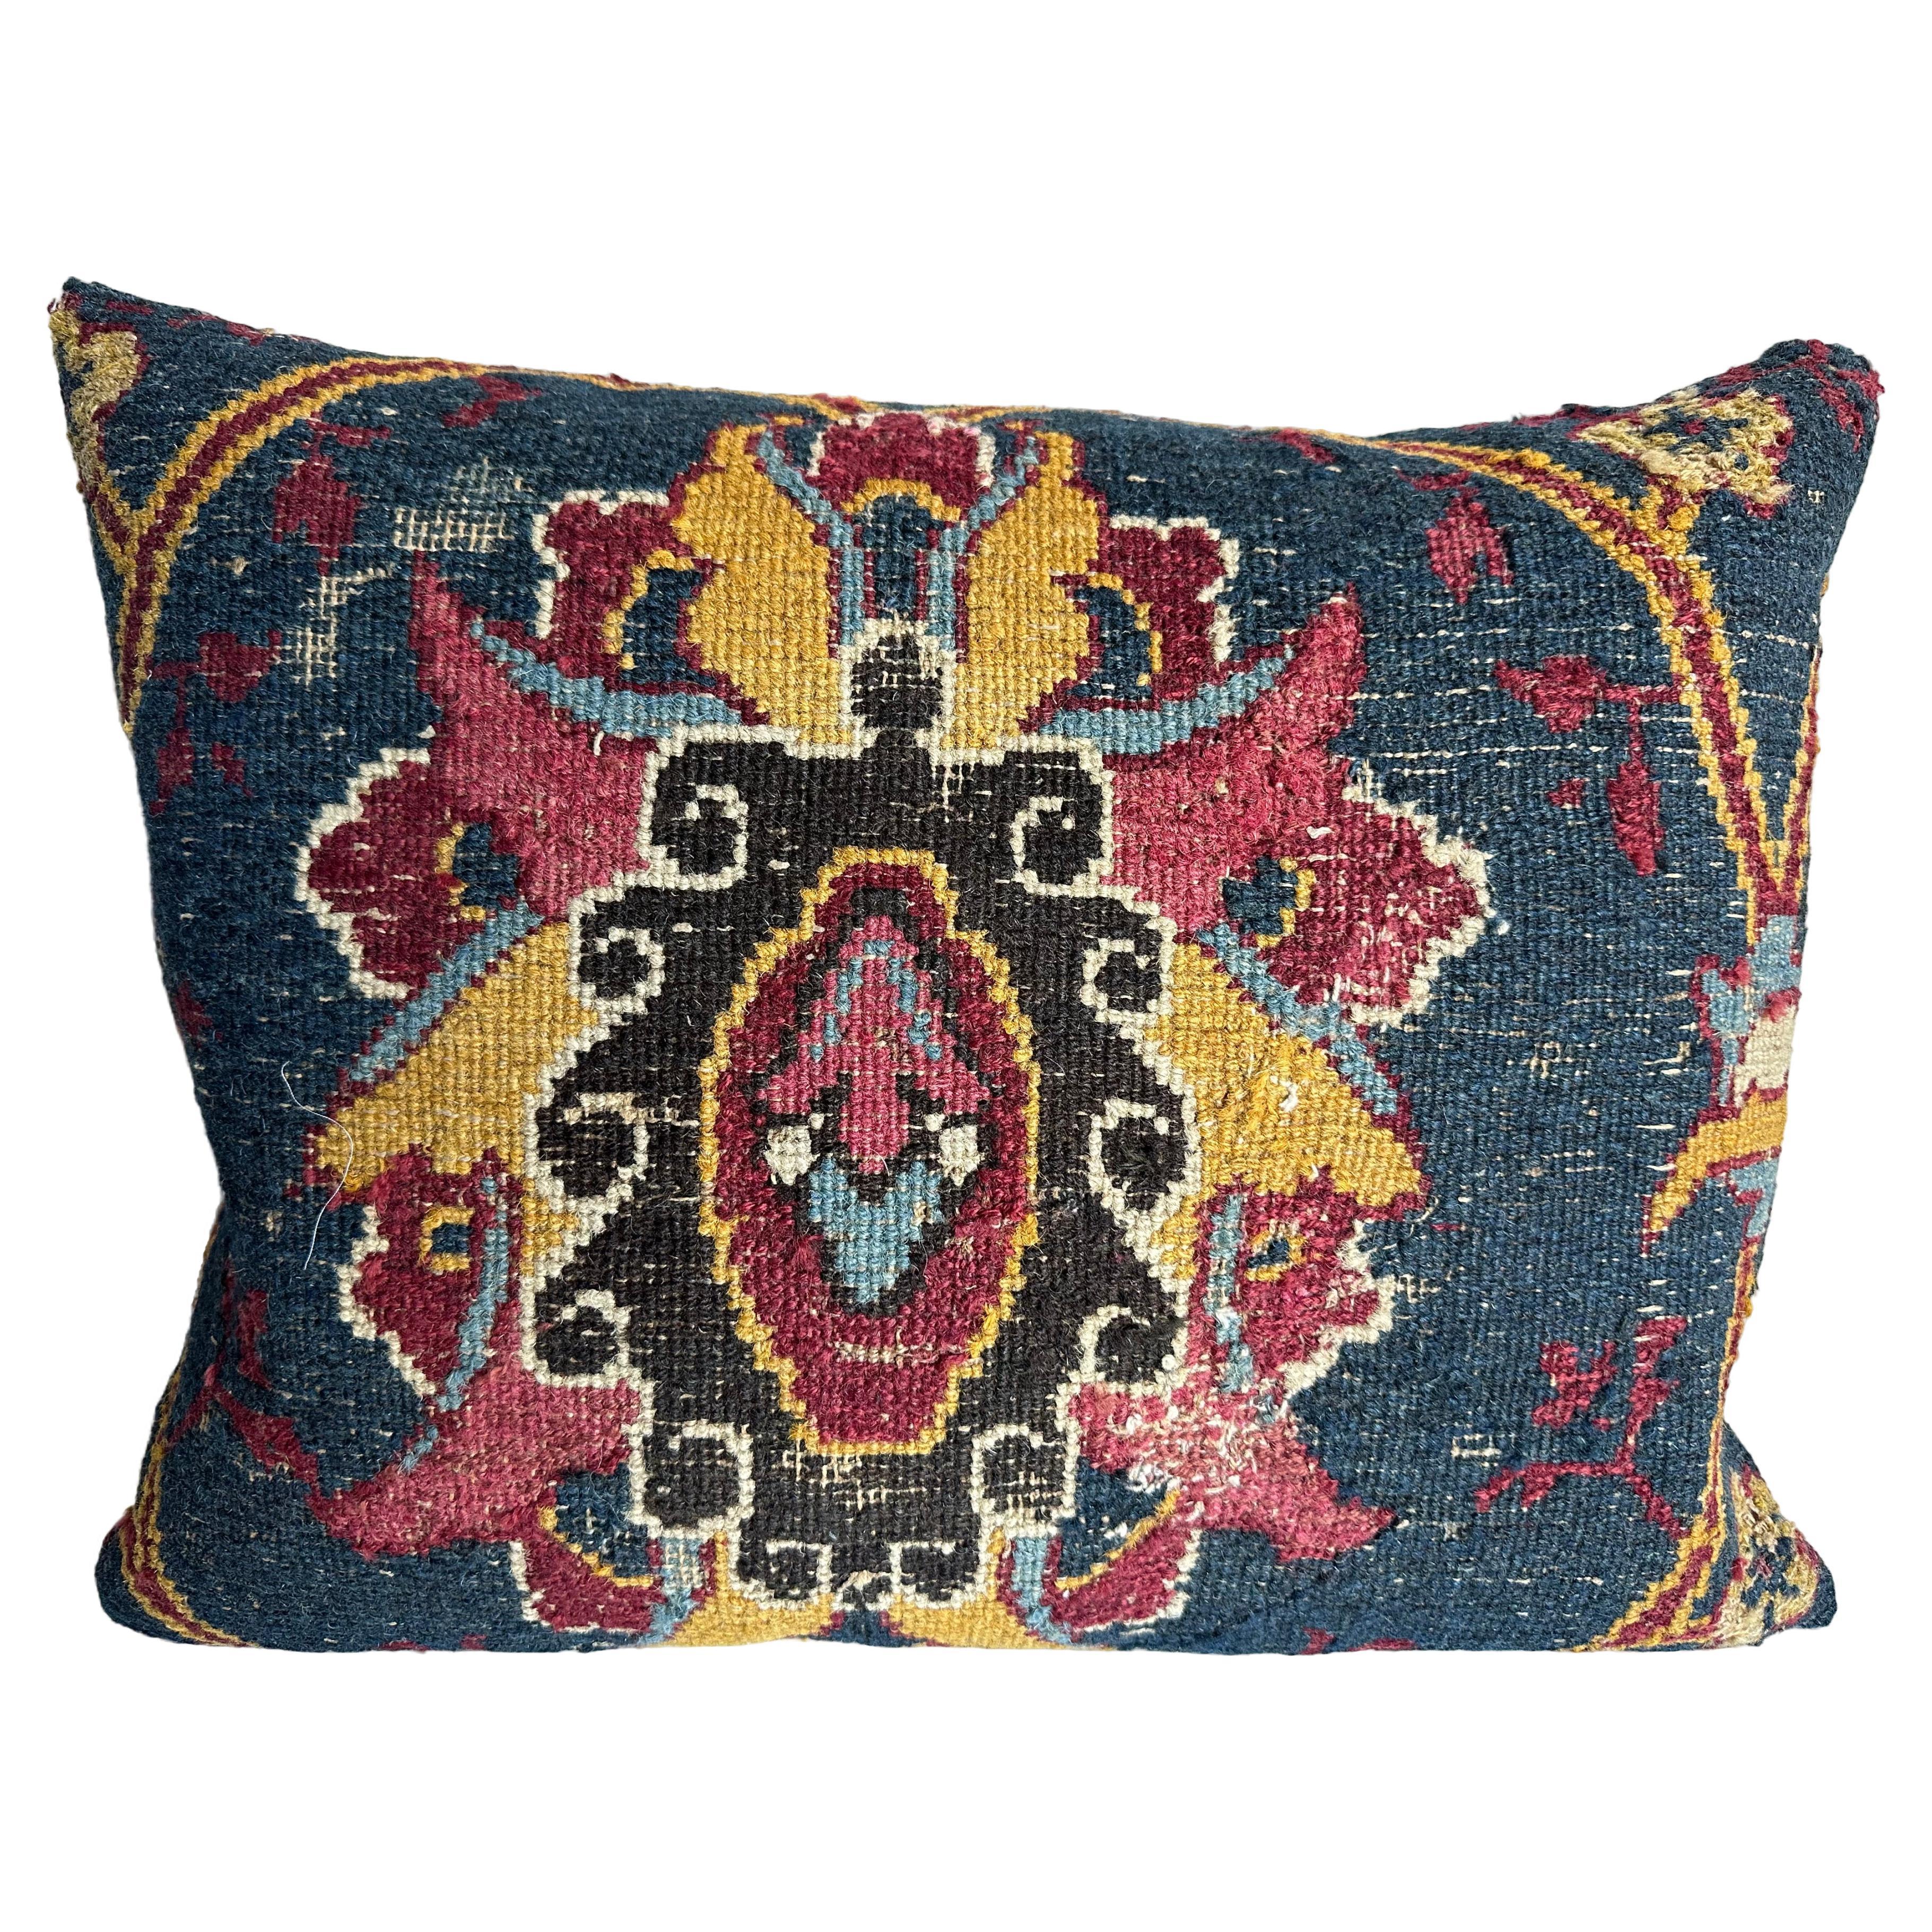 1850 Amritsar Pillow - 20" X 15" For Sale